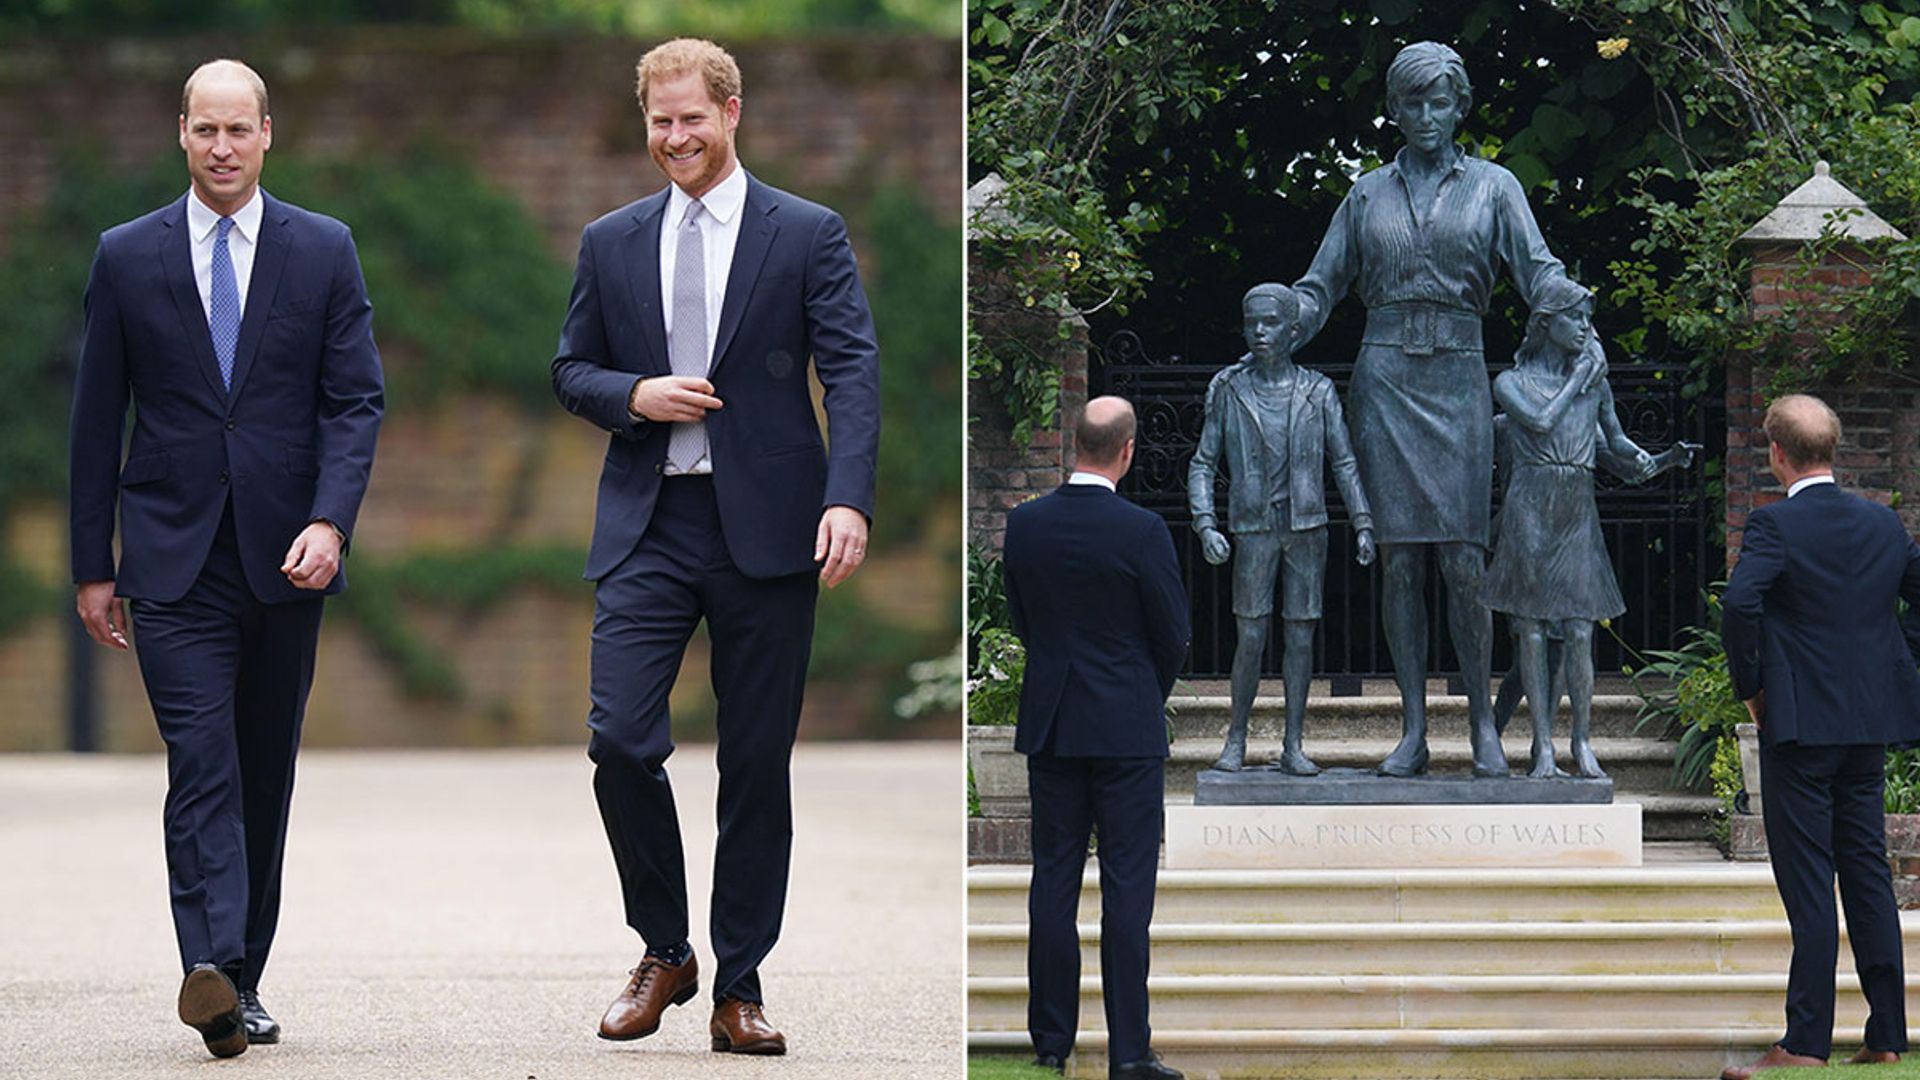 Princess Diana's statue unveiling: Harry and William reunite and family tributes - live updates